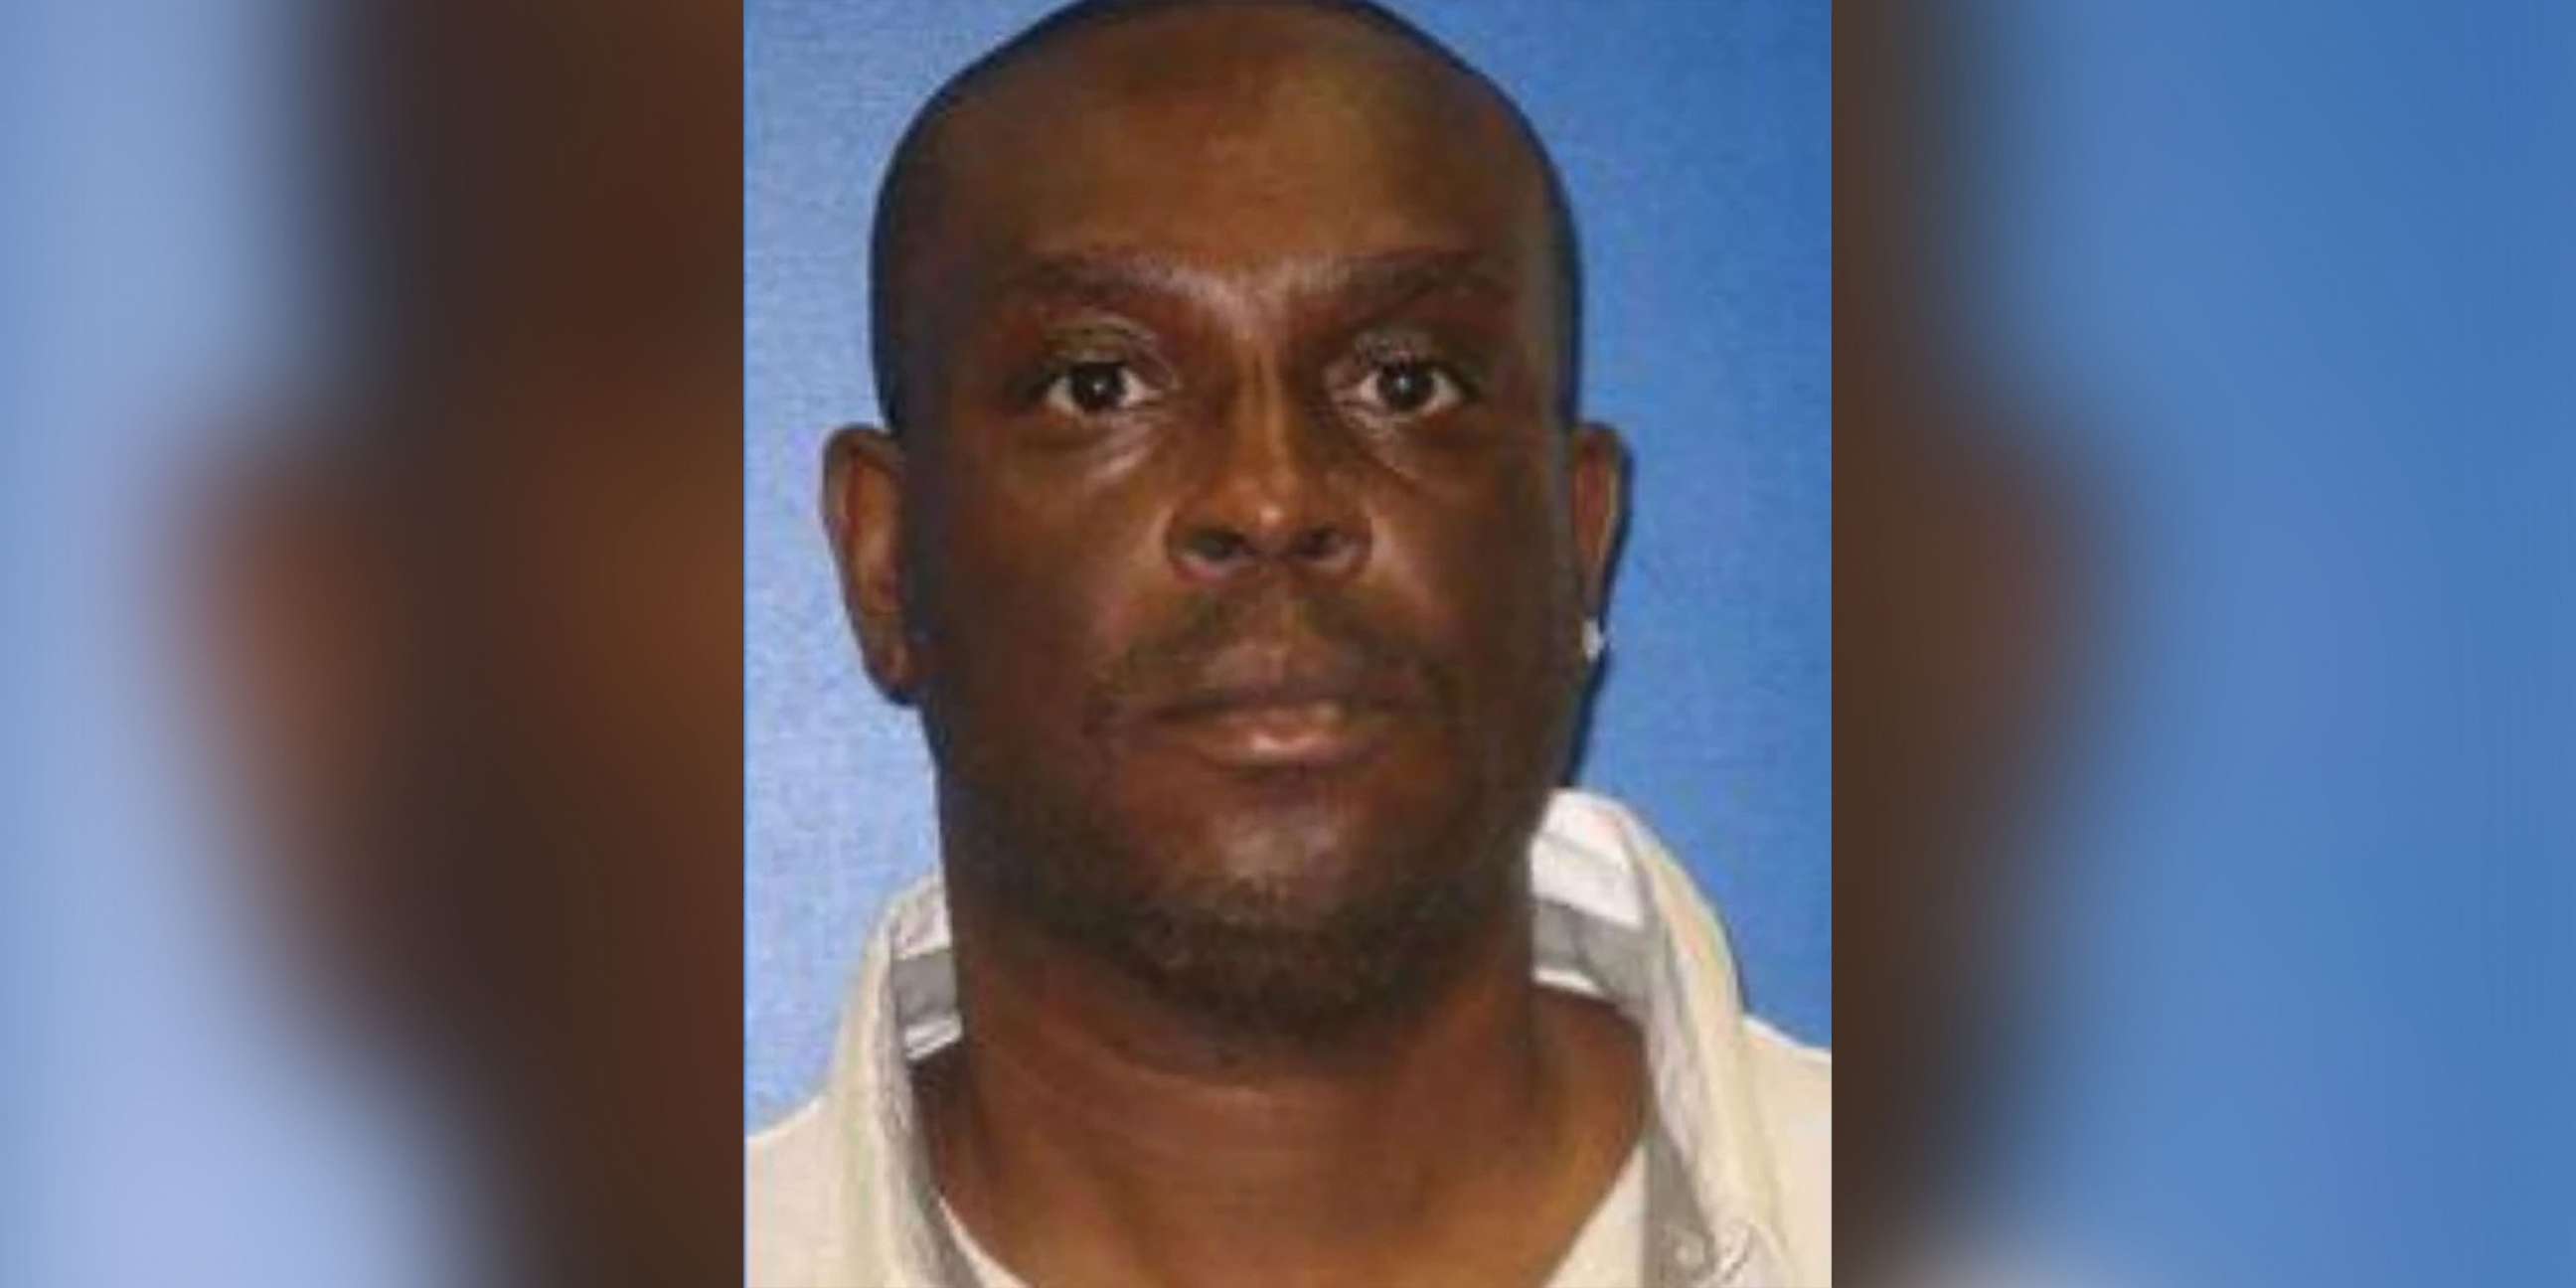 PHOTO: Fredrick Hampton, 50, is seen in a photo provided by the Jefferson County (Alabama) Sheriff's Office after police announced they were seeking him in connection with the death of 29-year-old Paighton Houston on Dec. 21, 2020.